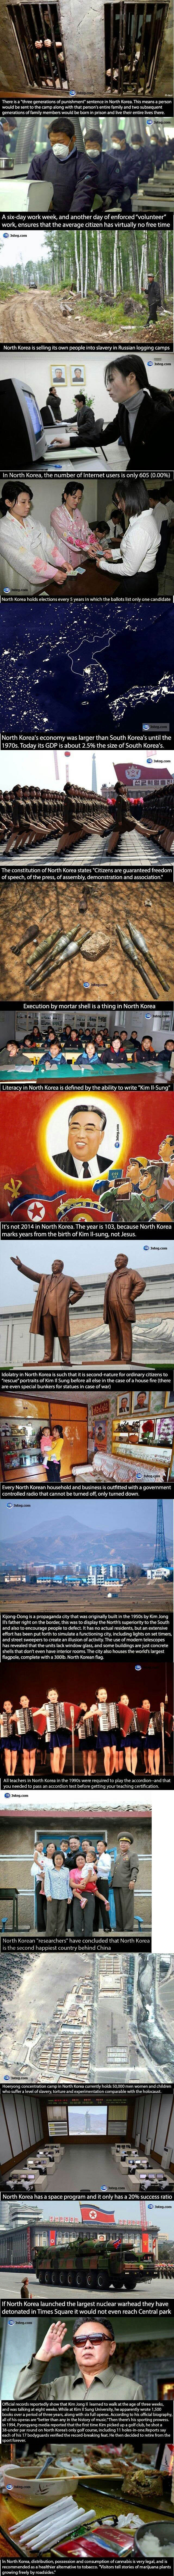 north korea is one fucked up place, kim jong ill